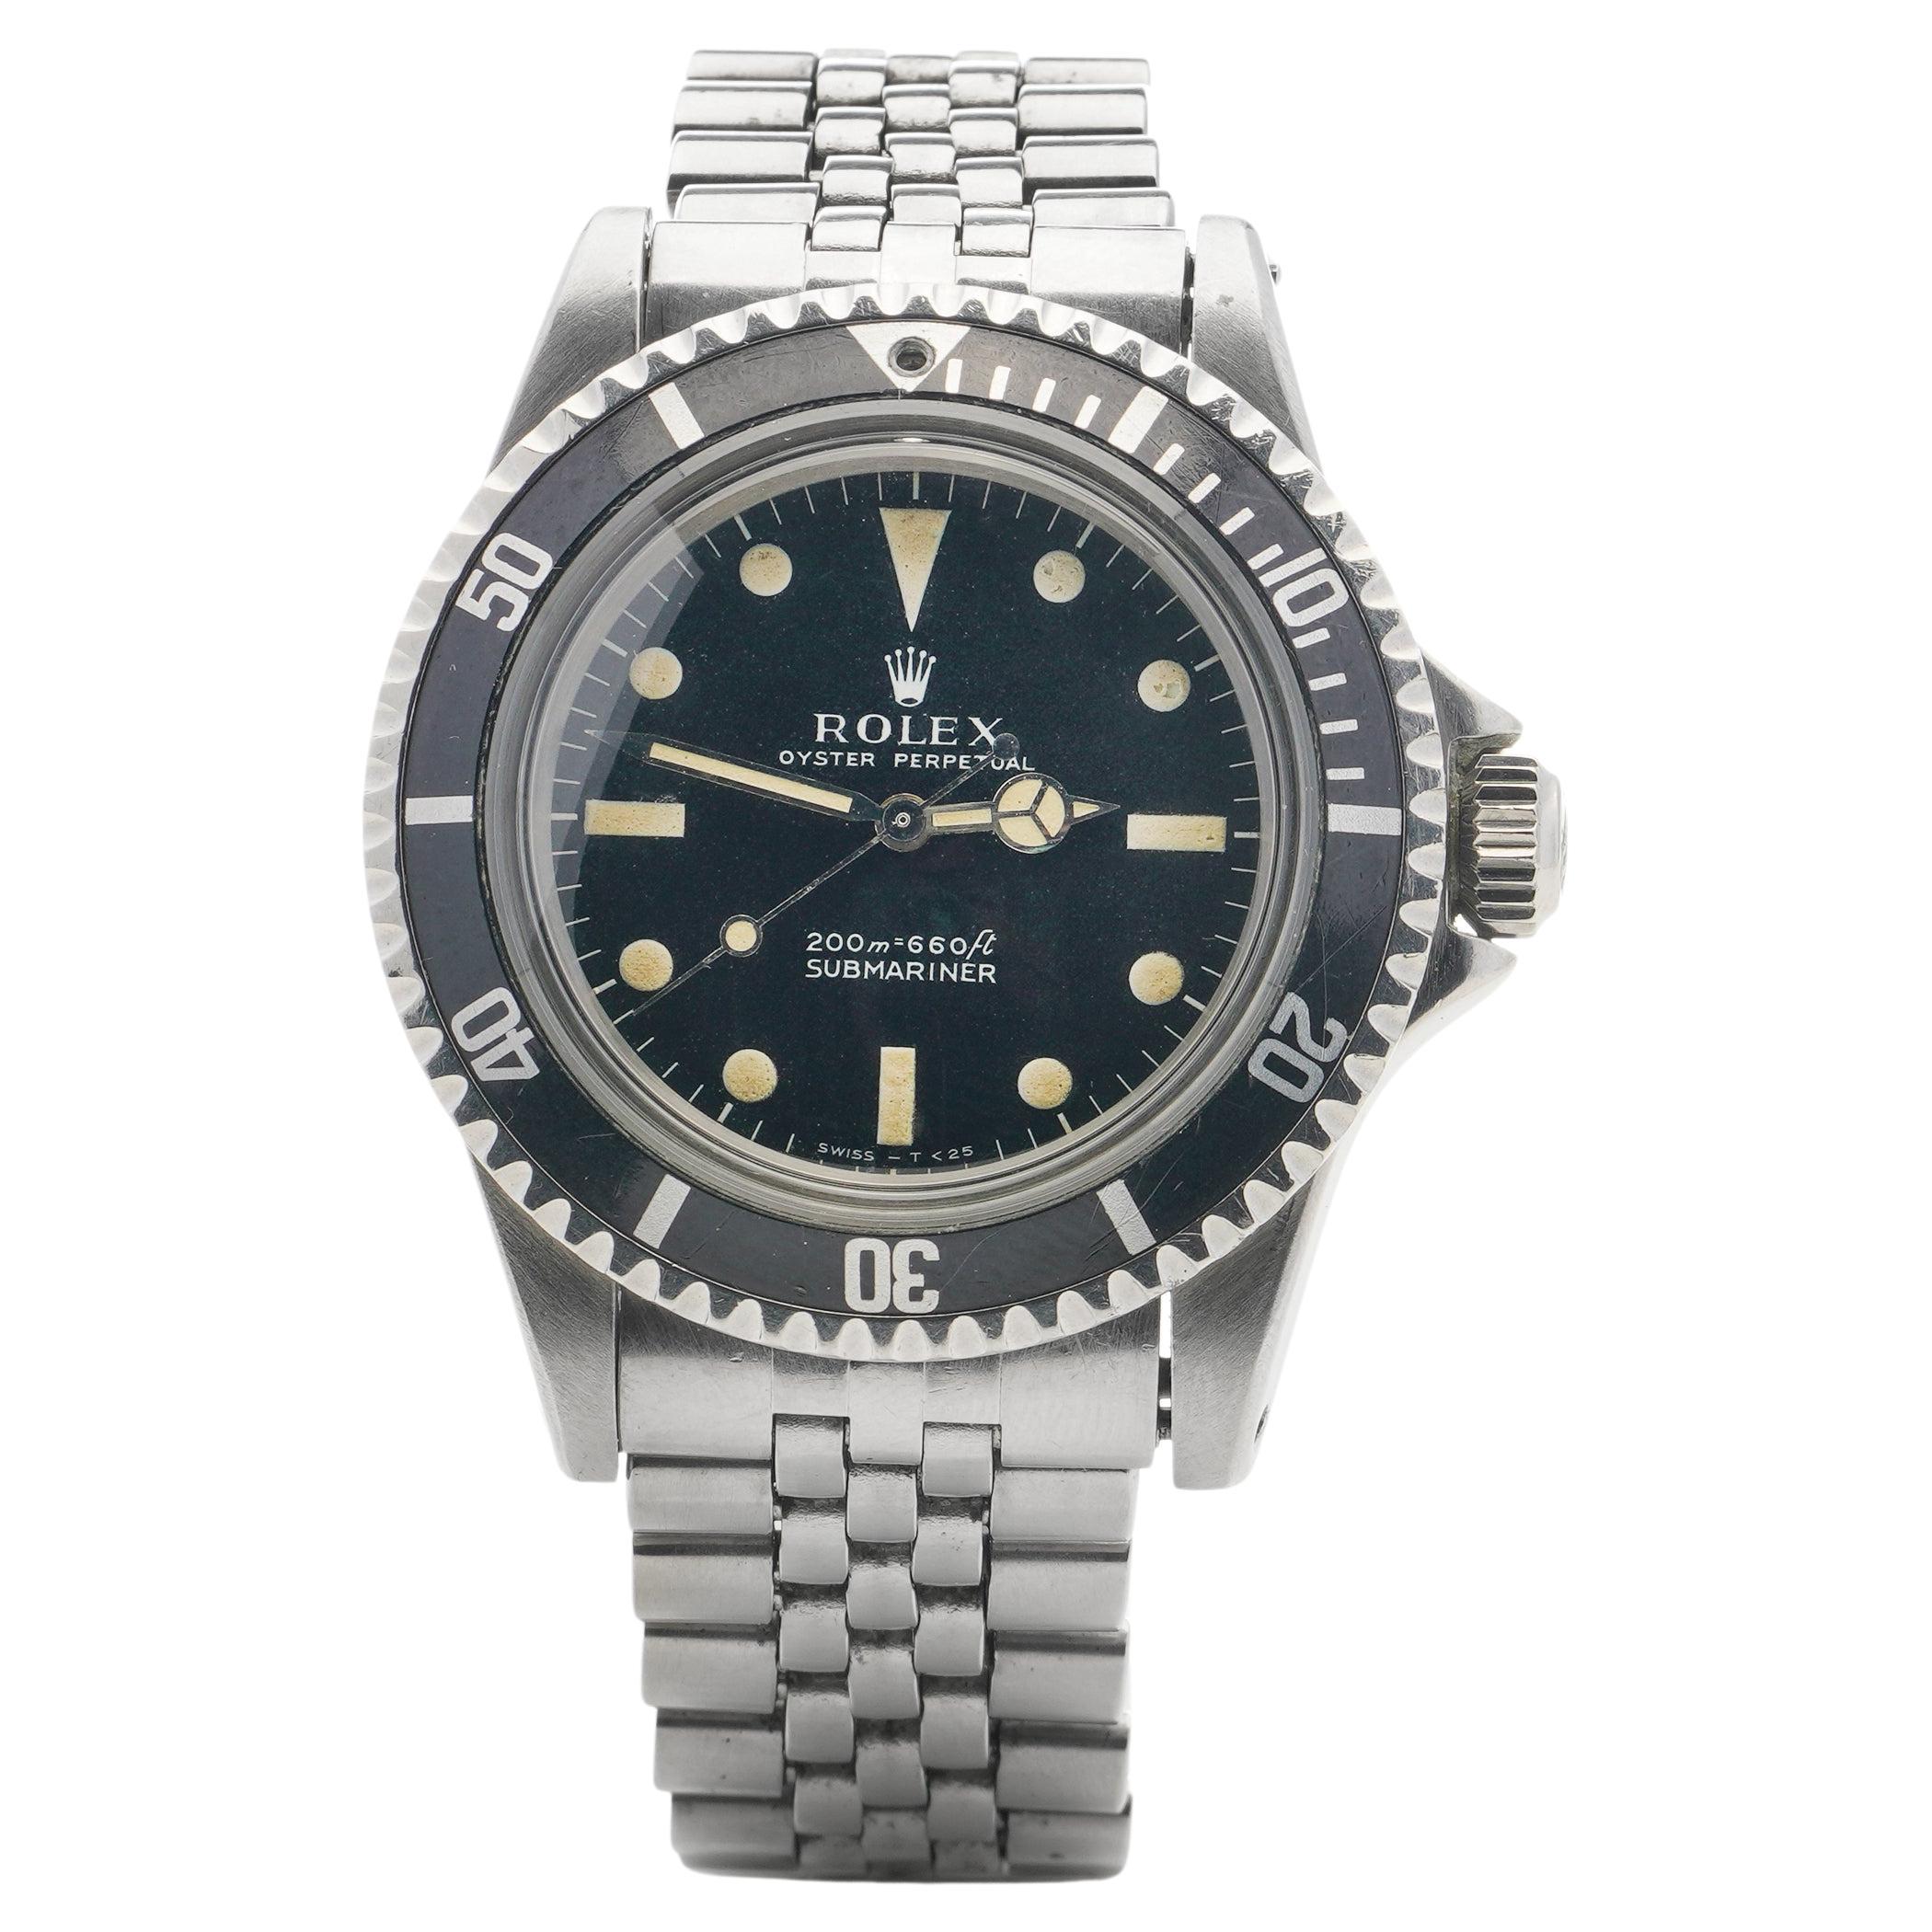 Rolex Oyster Perpetual Submariner, (es erstes Modell), 1967 